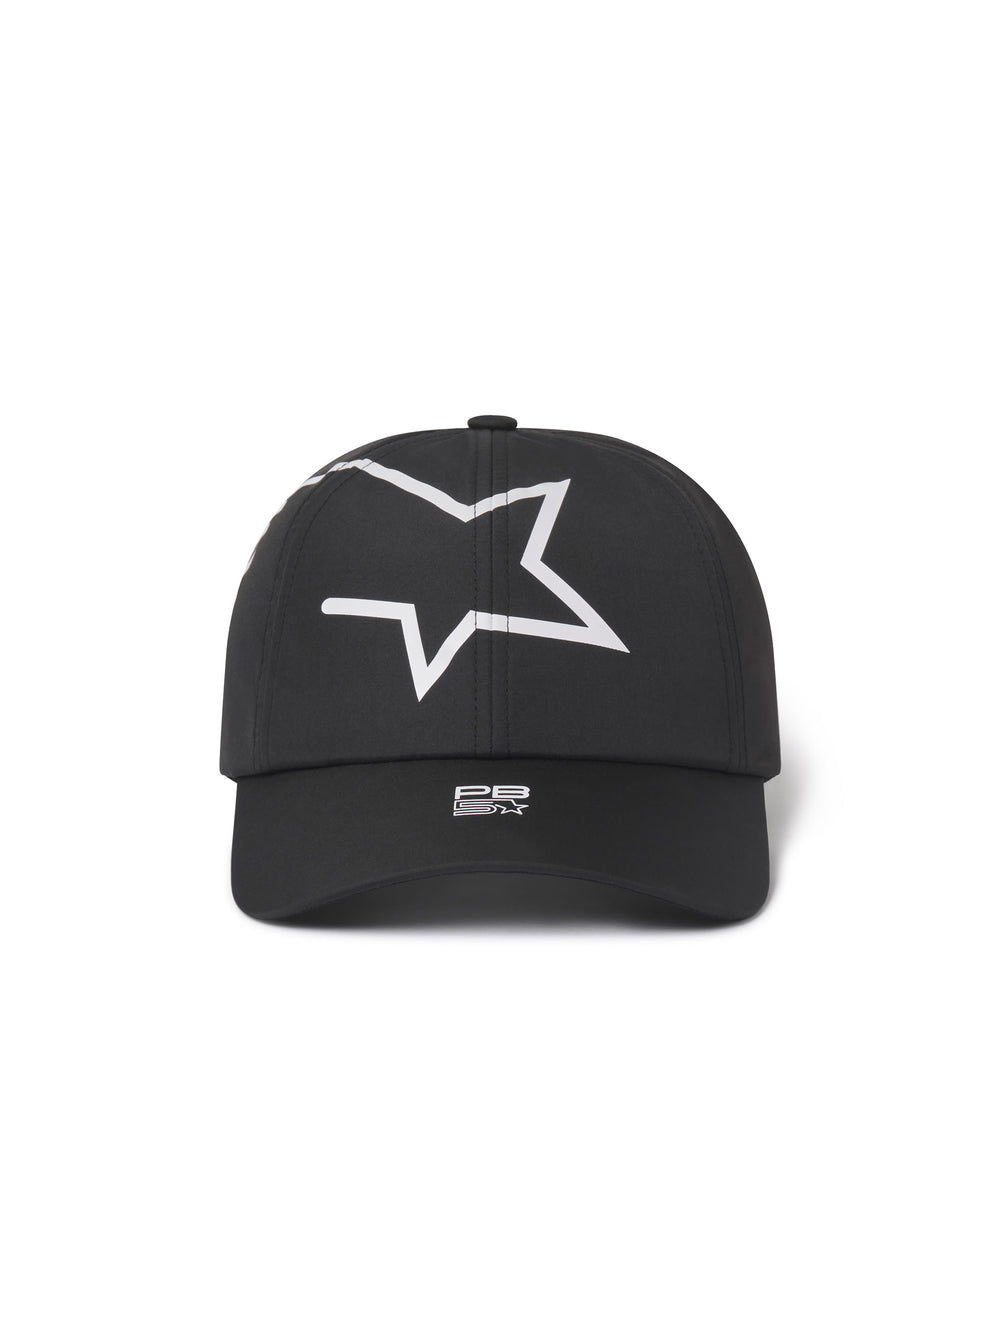 Stellar Cap front view in black with small logo on bill and large logo star on front of cap.